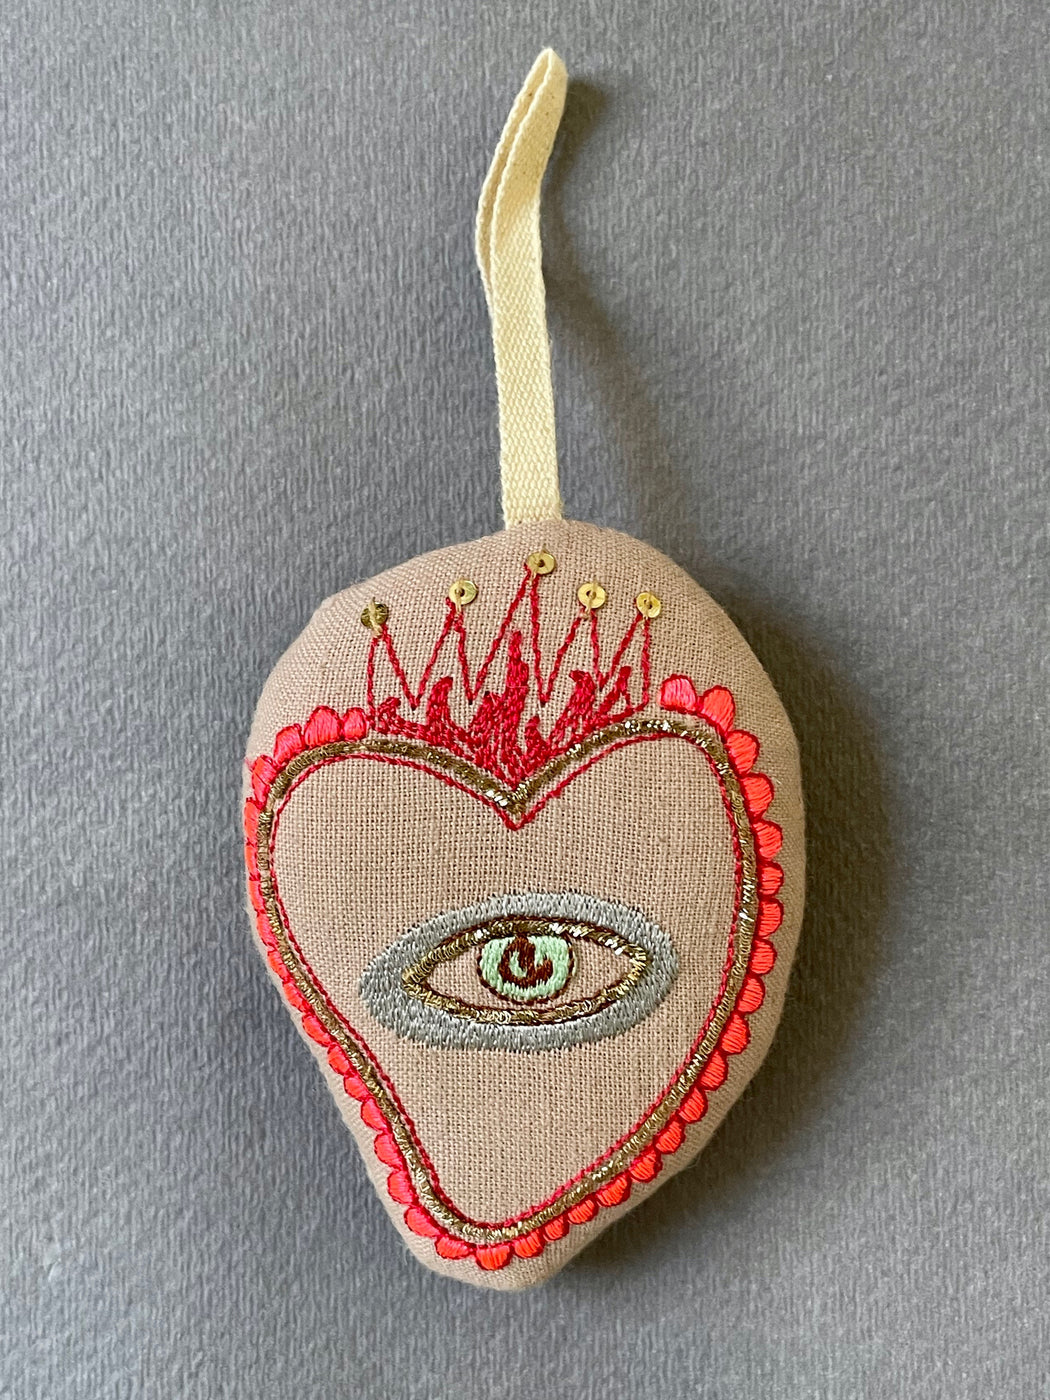 "Watchful Heart" Embroidered Lavender Sachet by Emma Mierop